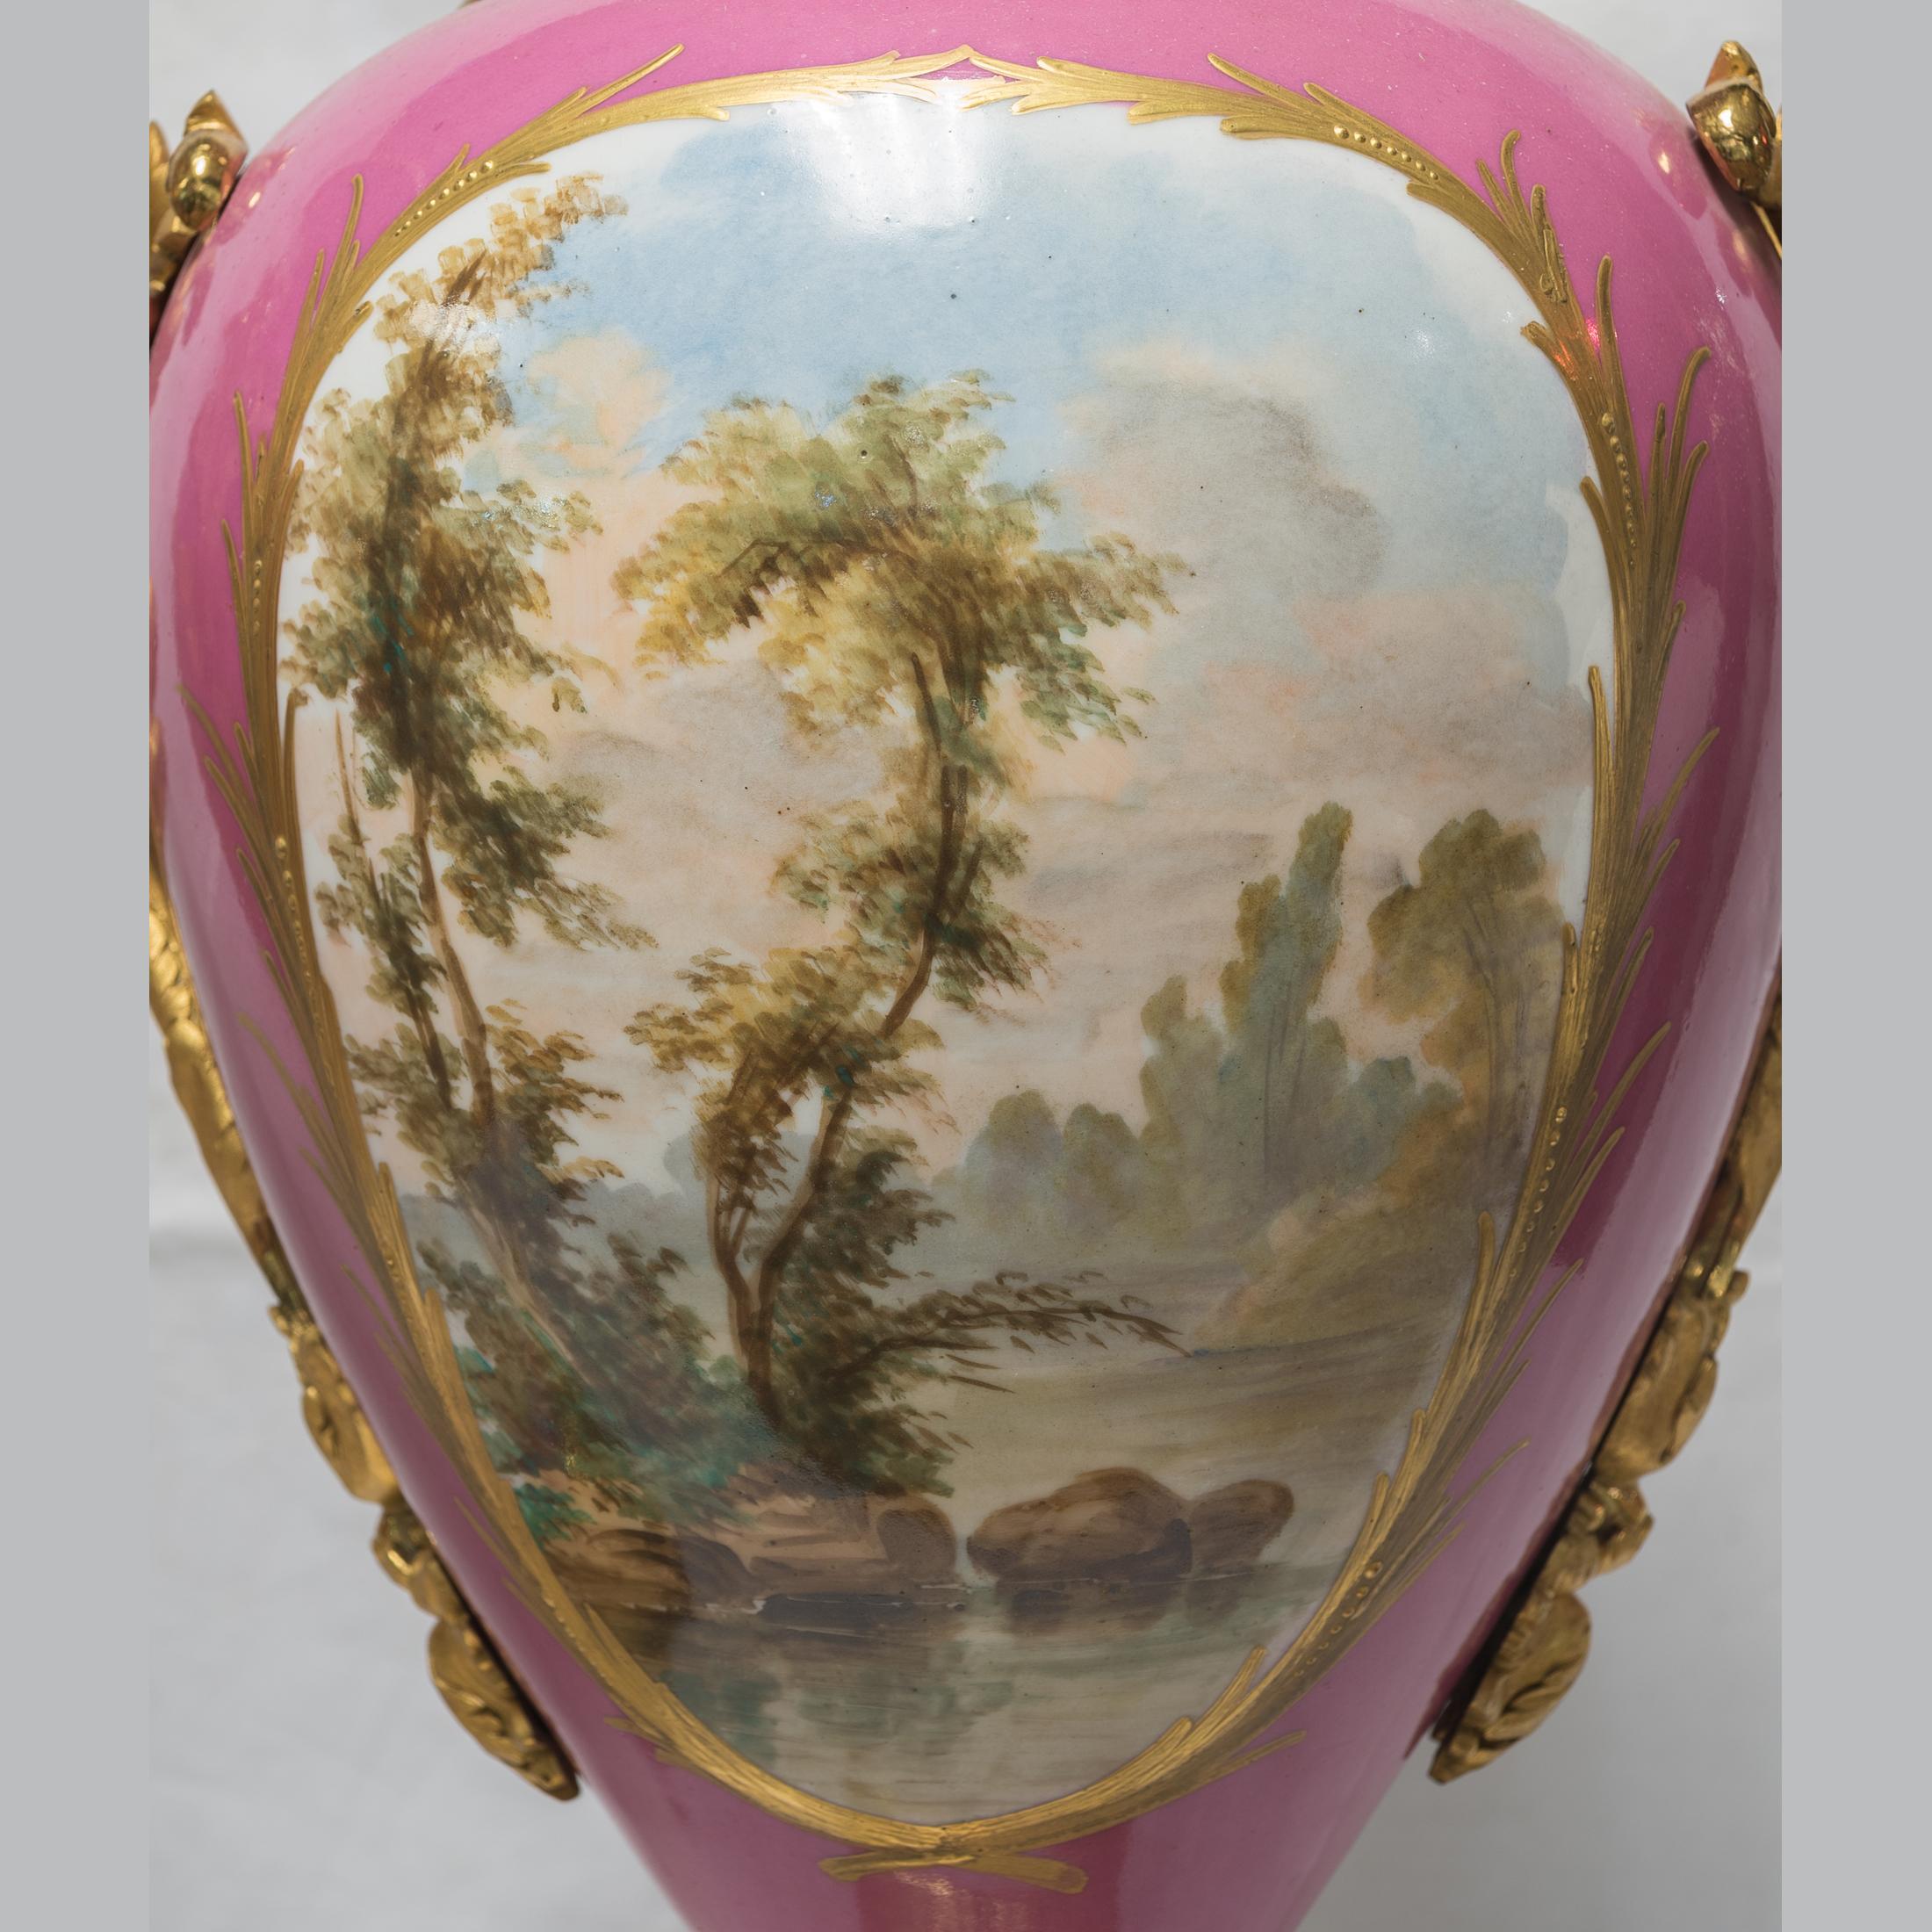 A fine quality pair of ormolu mounted Sèvres style porcelain pink-ground vases.
Each painted with courtly scenes, the reverse with a lakeside landscape, flanked by foliate handles, on a square base. 

Origin: French
Date: circa 1900
Dimension: